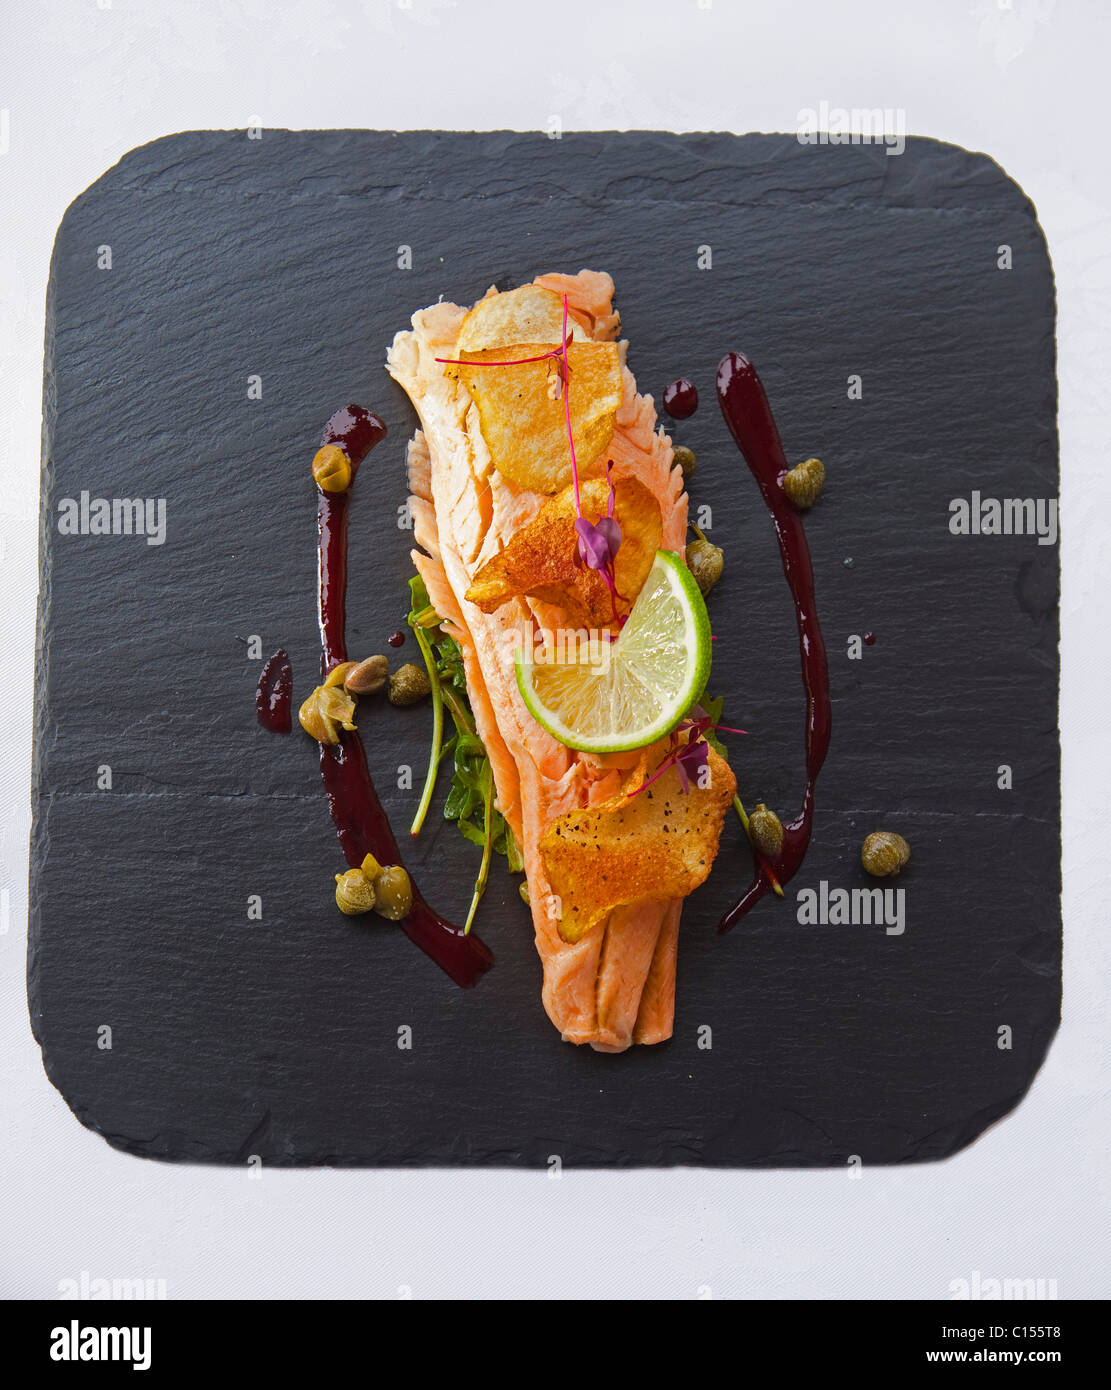 Starter warmed oak smoked trout fillet with a lemon caper and crisp potato salad and beetroot puree on slate 116362 Food06 Stock Photo